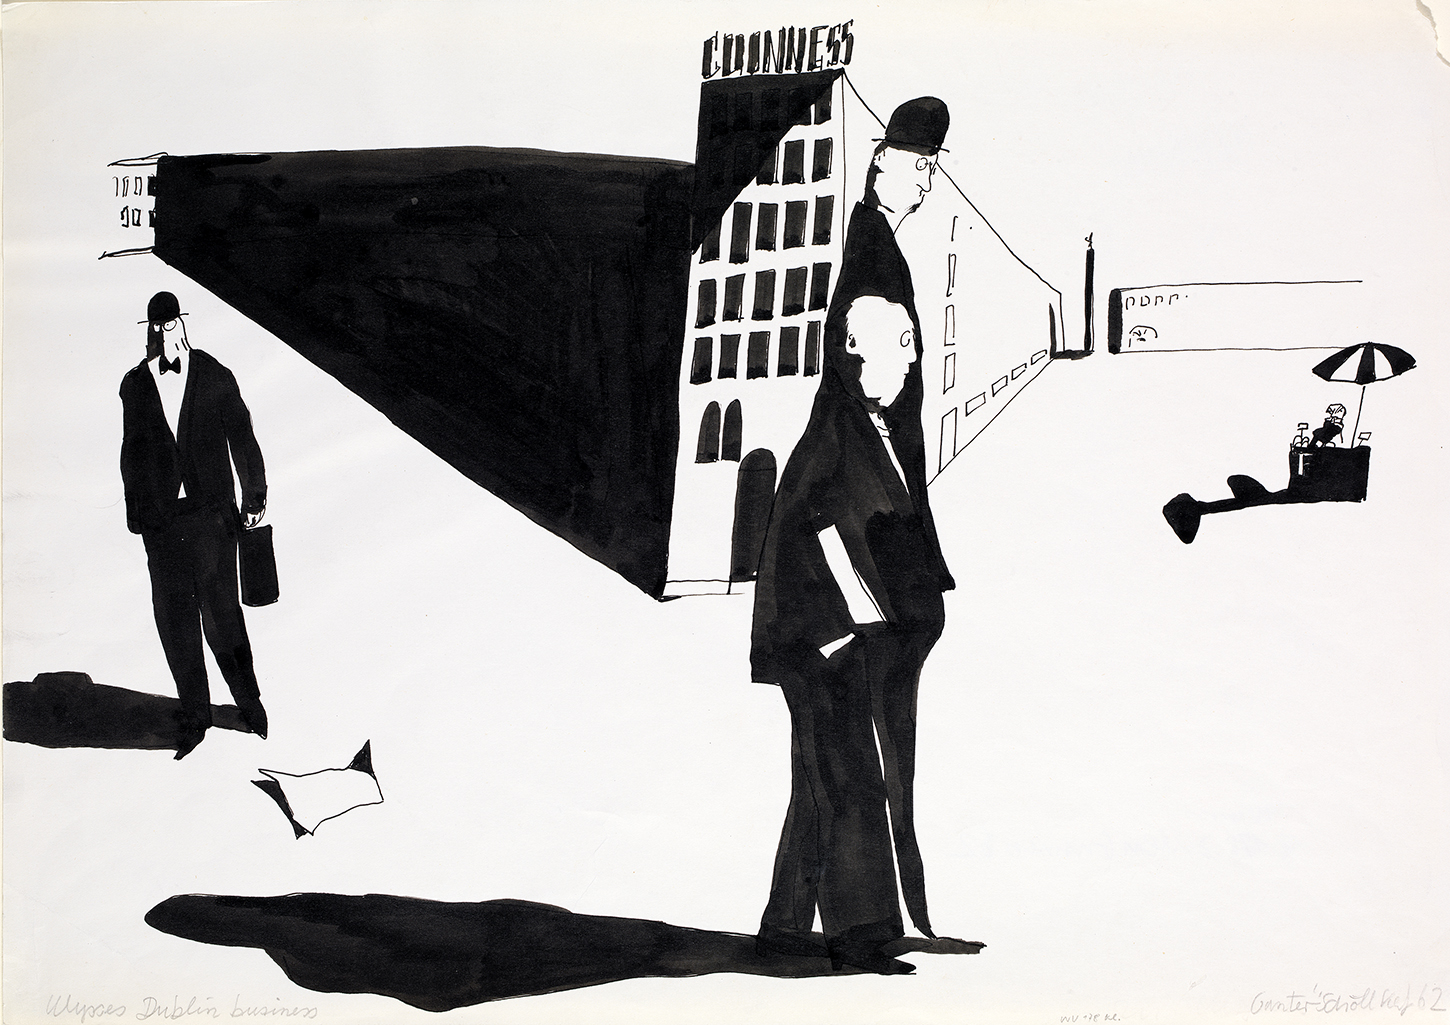 Minimalist pen and ink drawing of three business men walking past the Guinness factory in Dublin